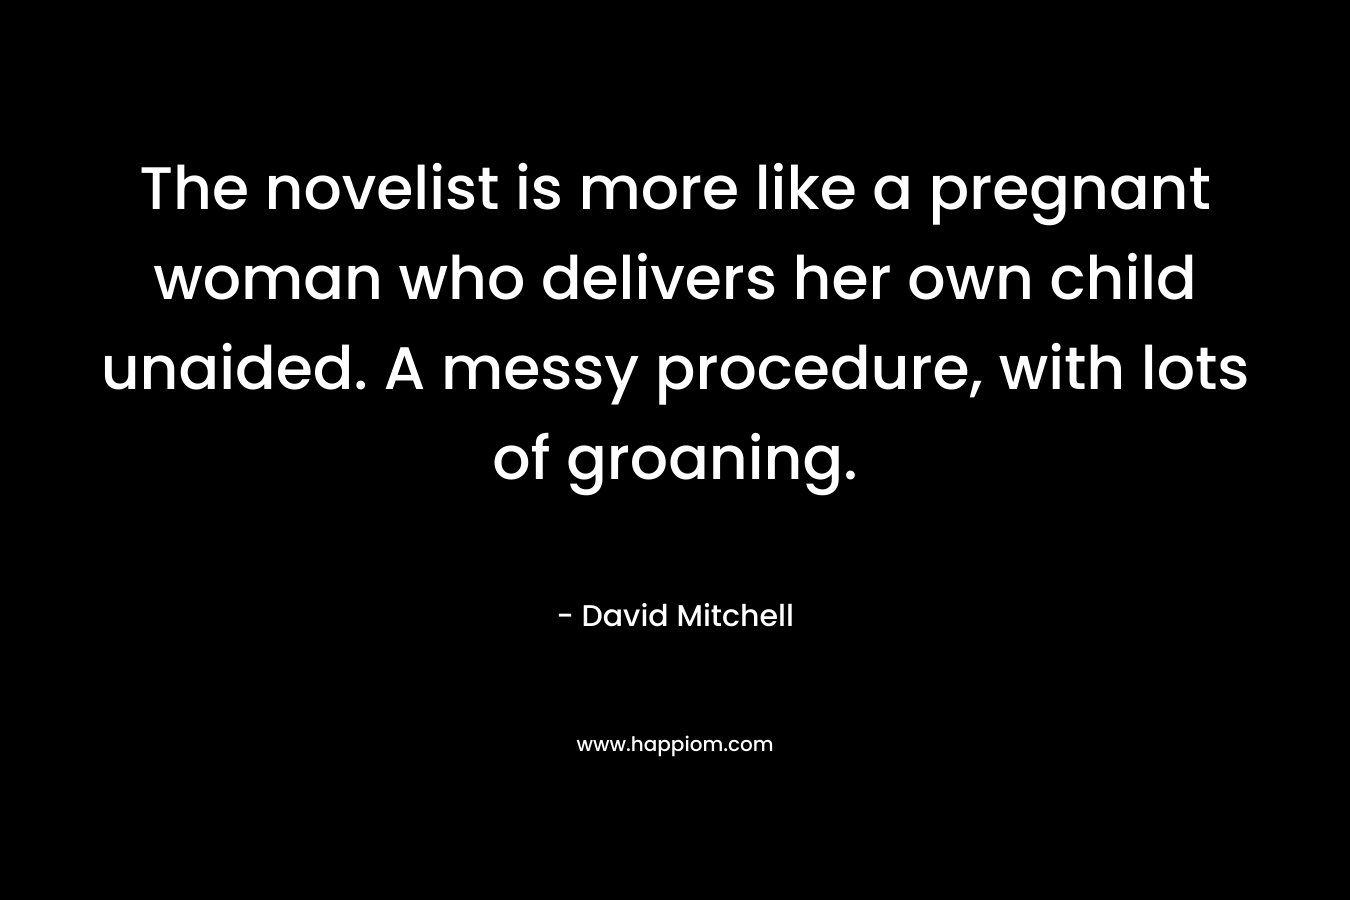 The novelist is more like a pregnant woman who delivers her own child unaided. A messy procedure, with lots of groaning. – David Mitchell